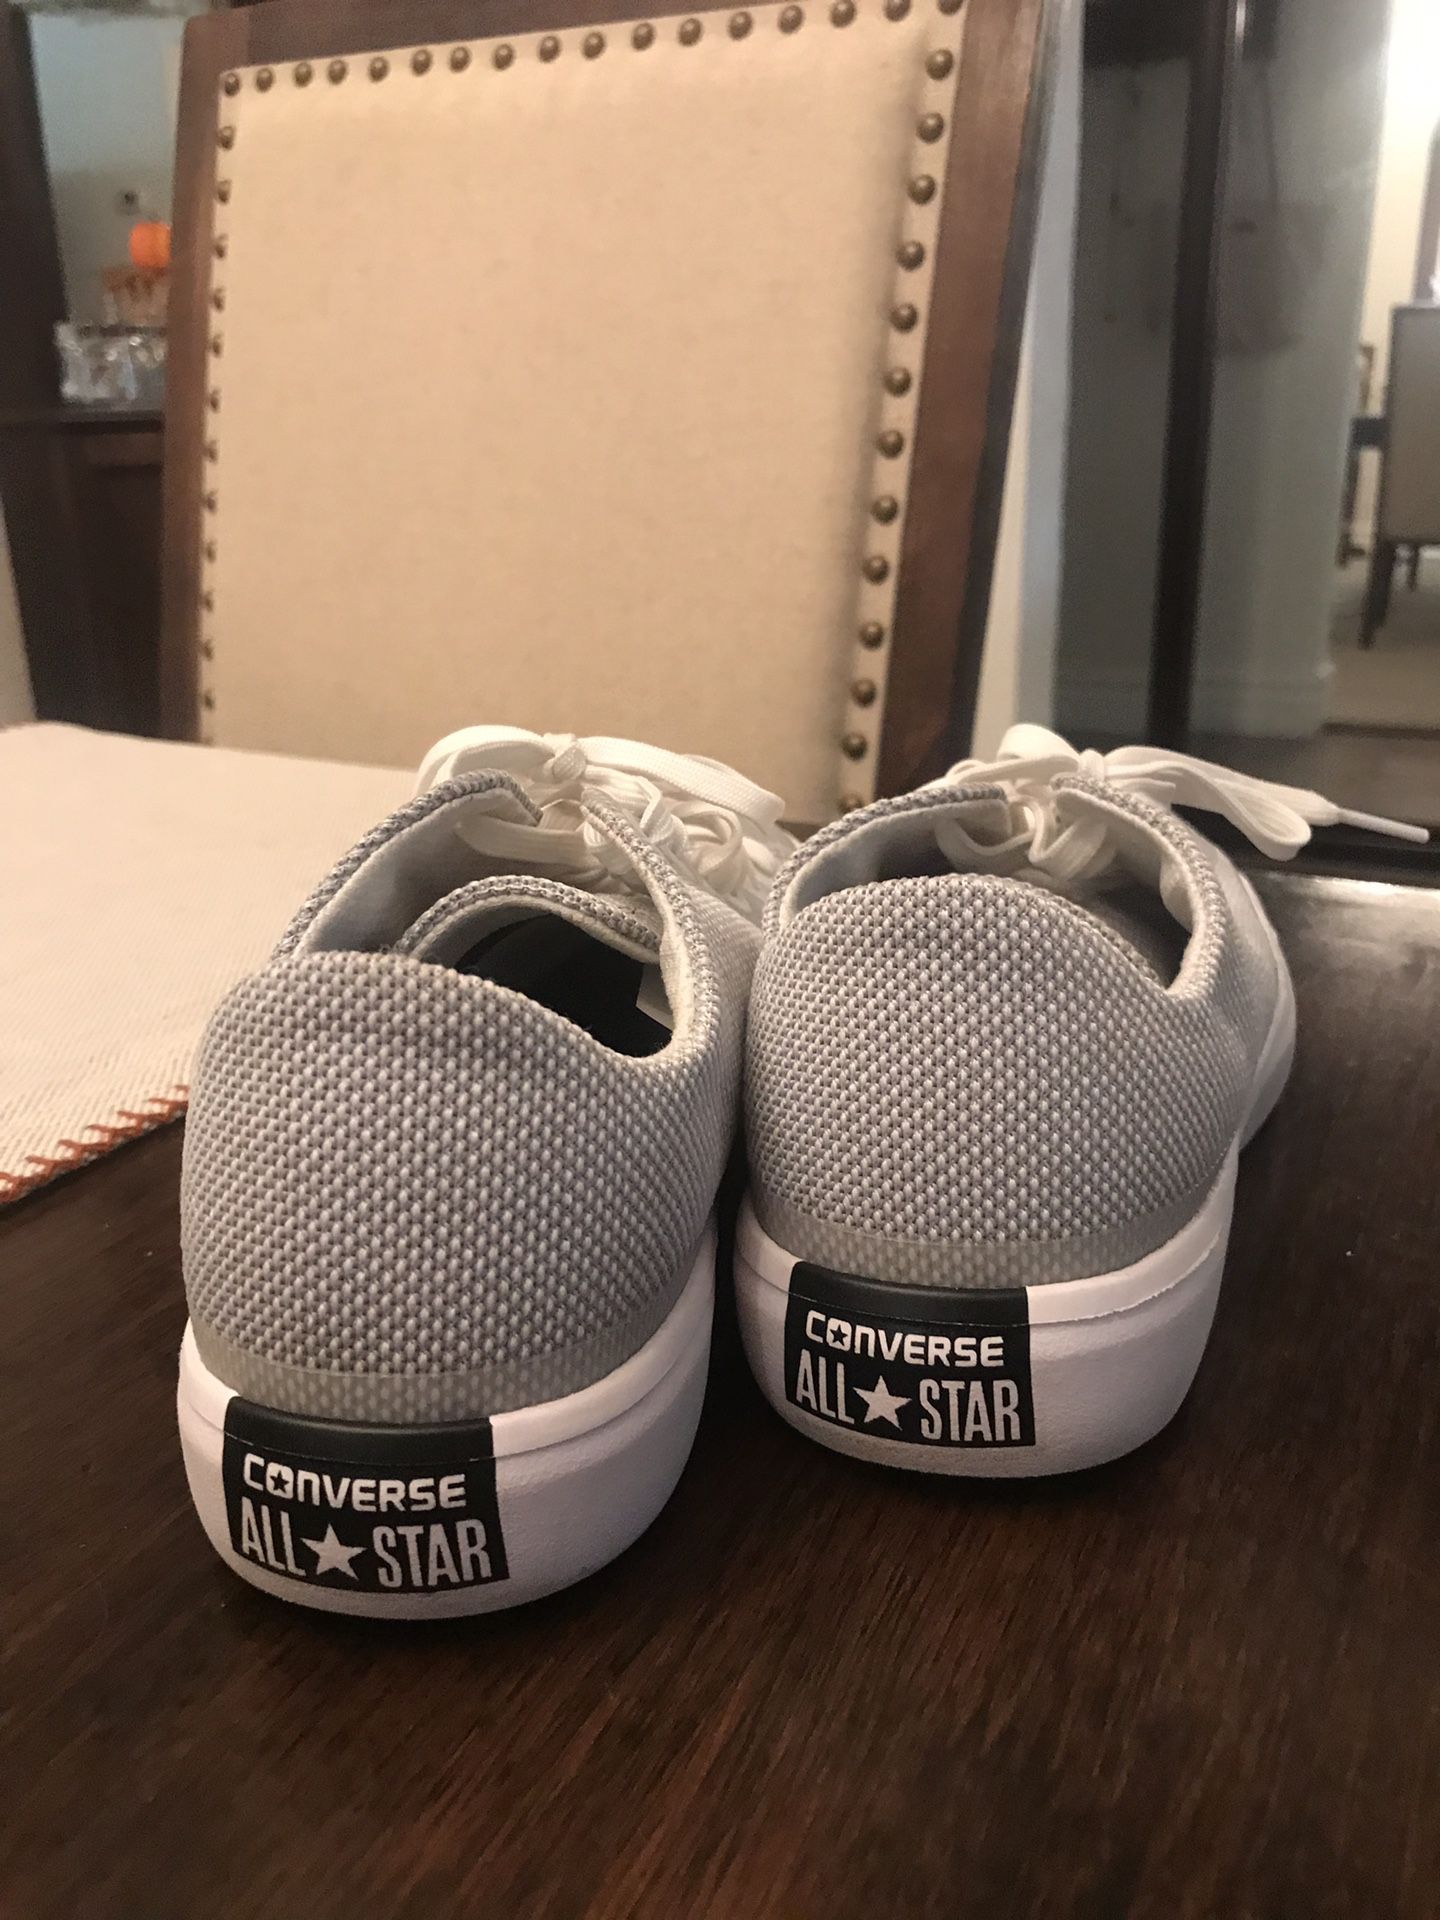 Converse all star size 9 shoe